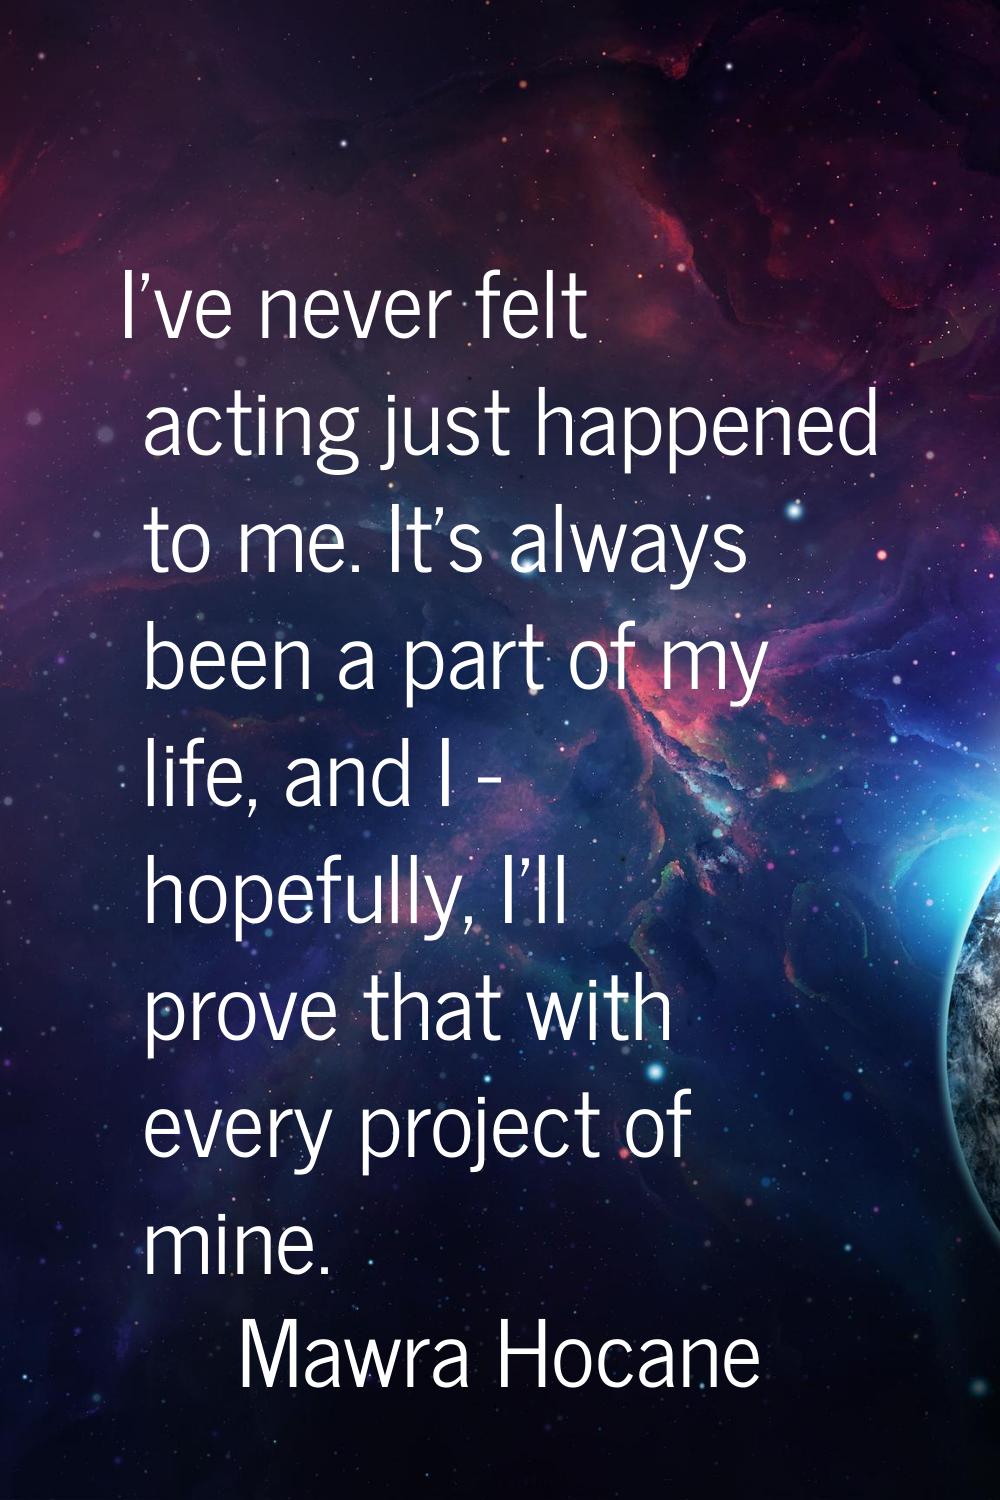 I've never felt acting just happened to me. It's always been a part of my life, and I - hopefully, 